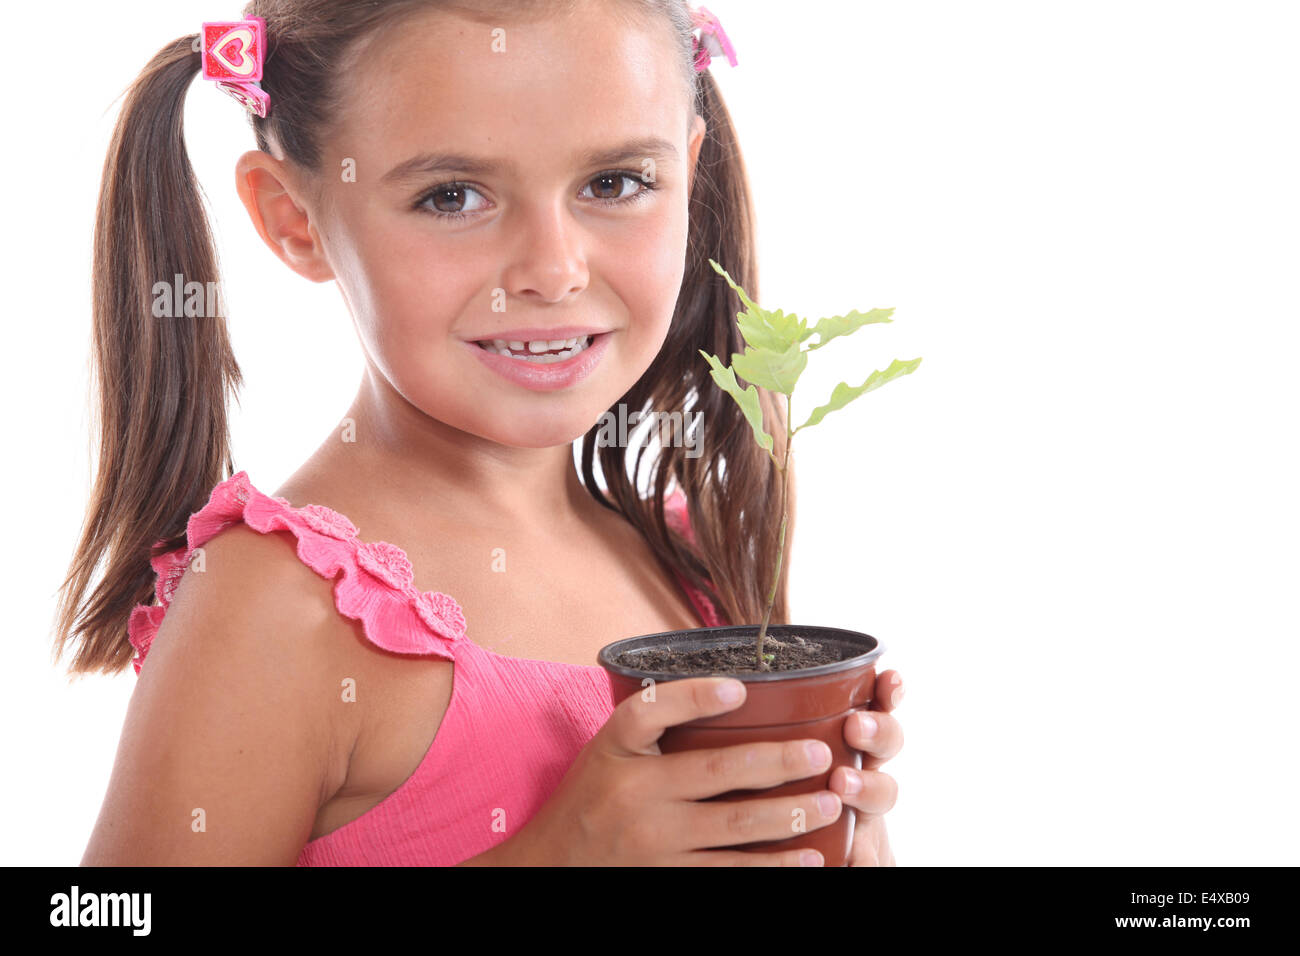 Girl with a plant Stock Photo